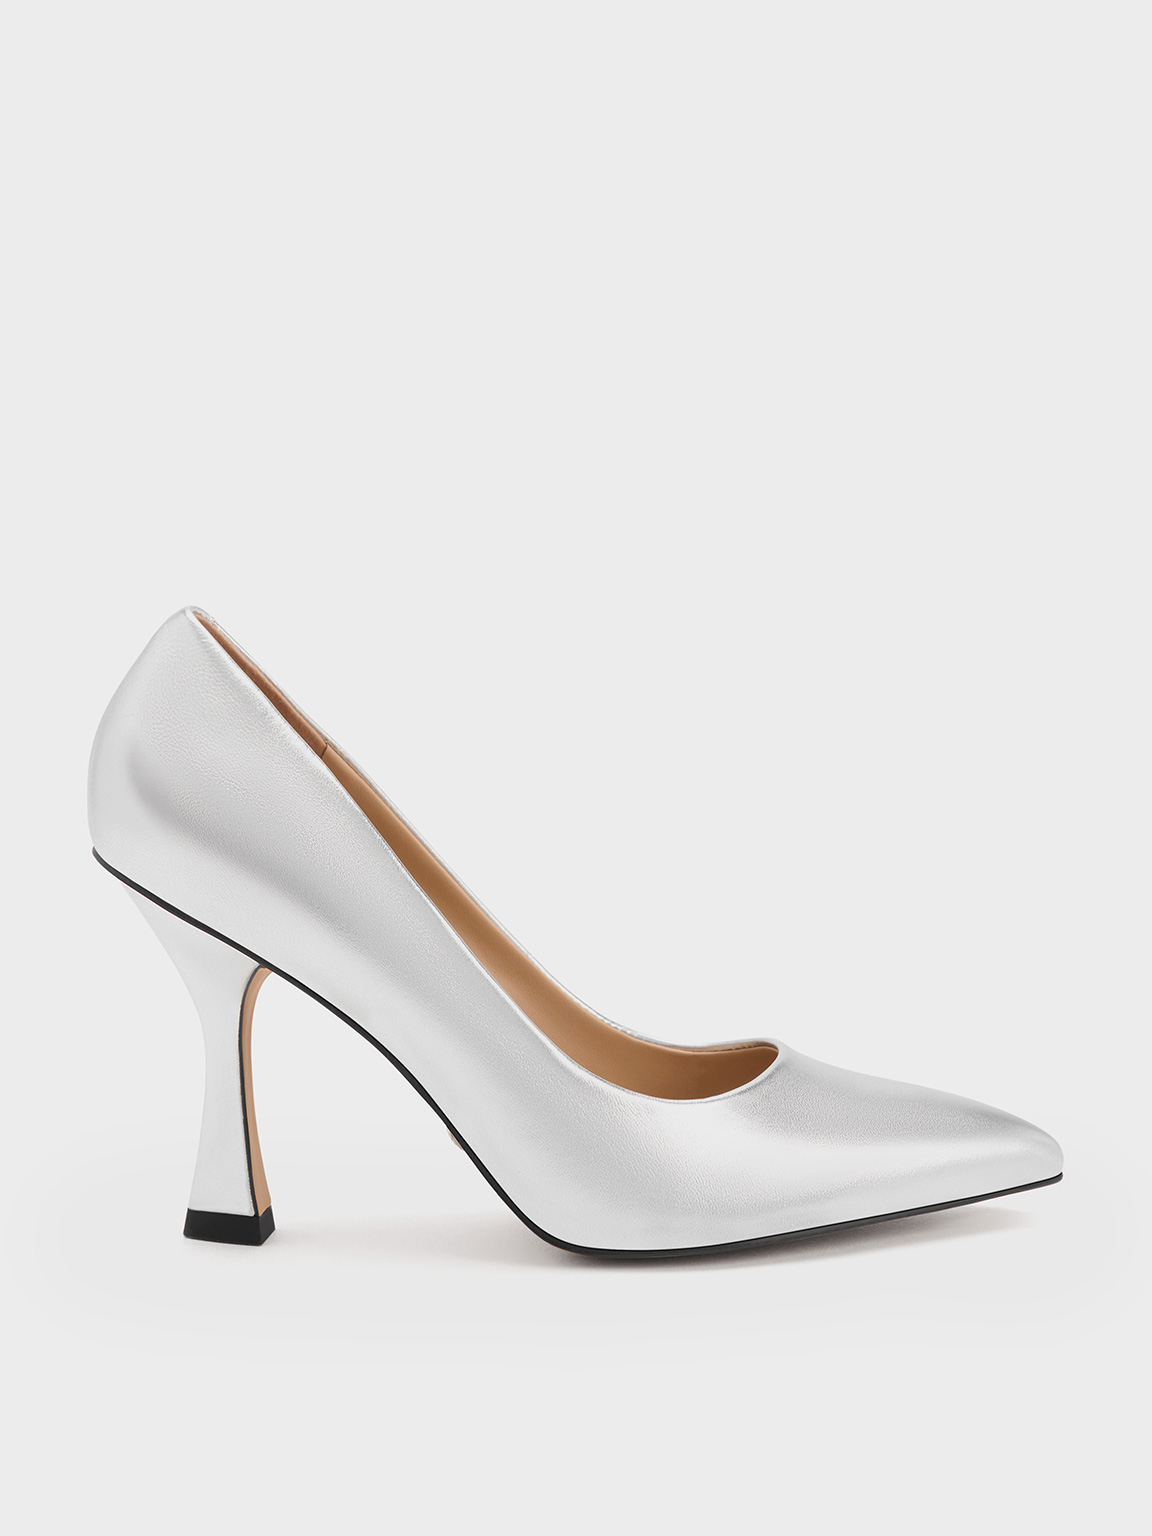 Silver Metallic Double Strap Mary Jane Pumps - CHARLES & KEITH International